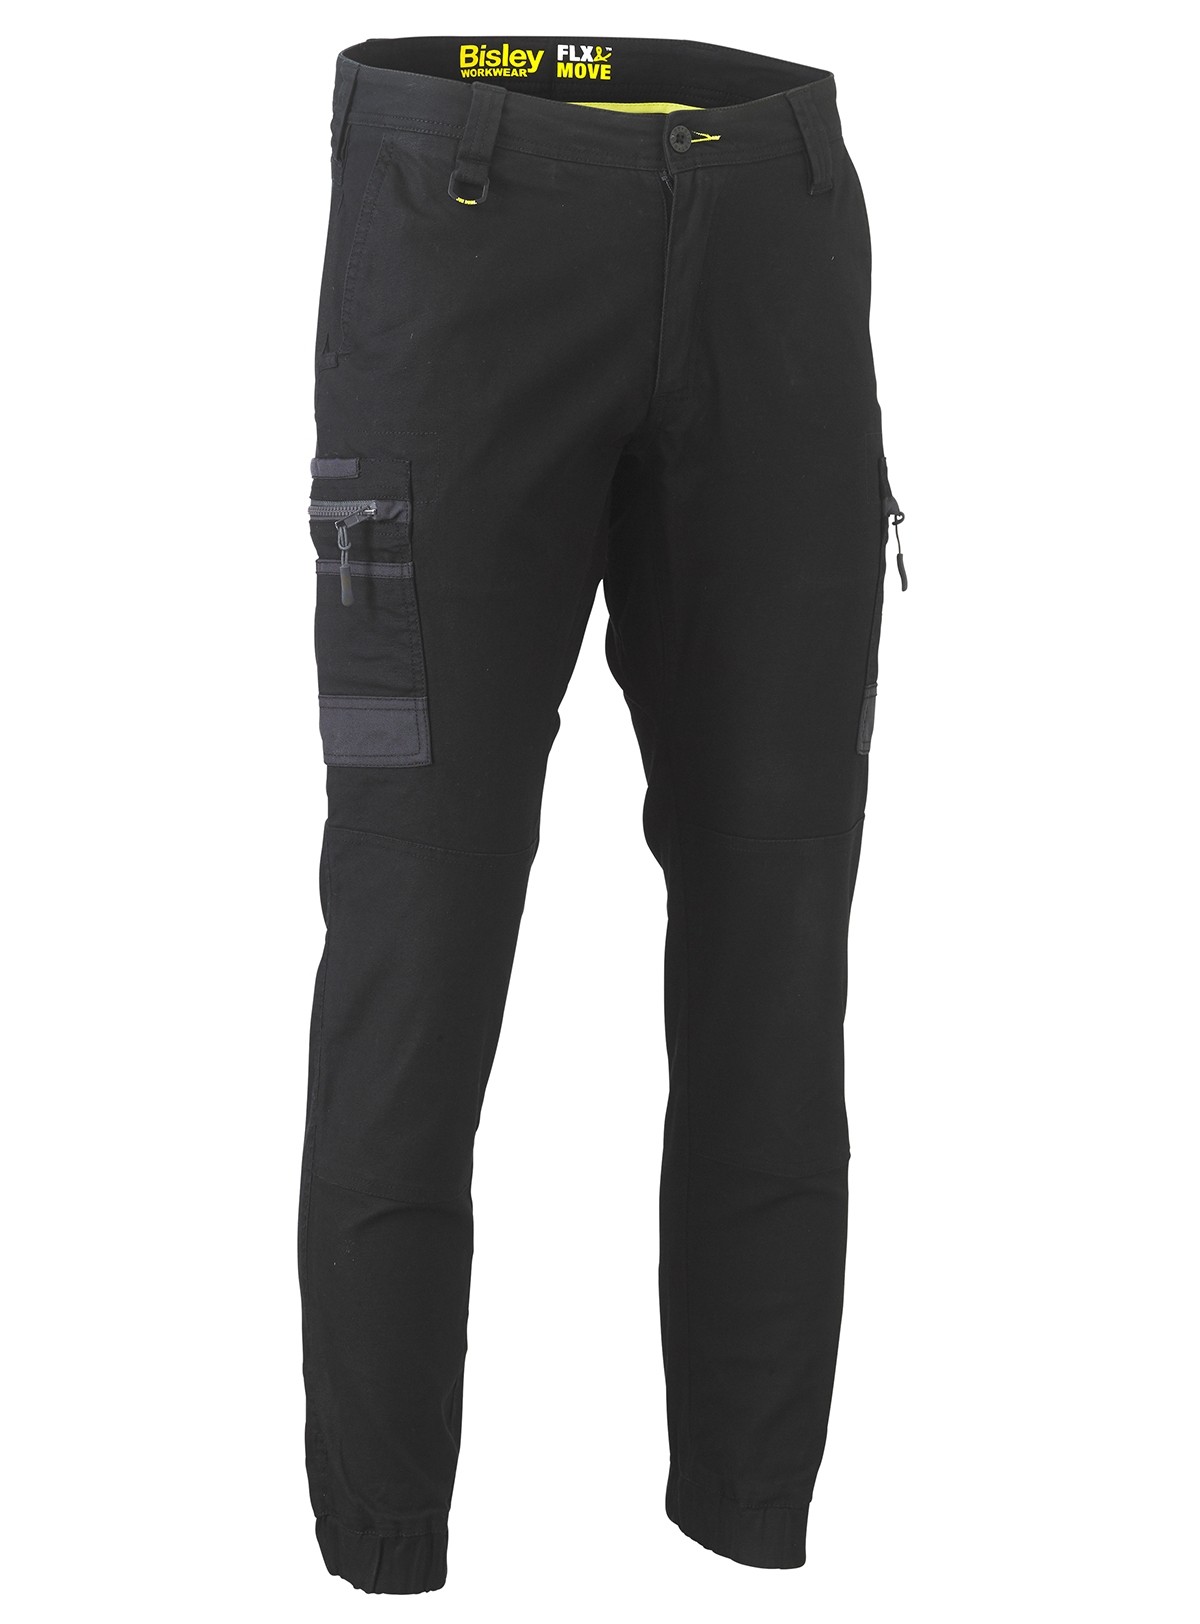 Buy Flx & Move Stretch Cargo Cuffed Pants in NZ | The Uniform Centre